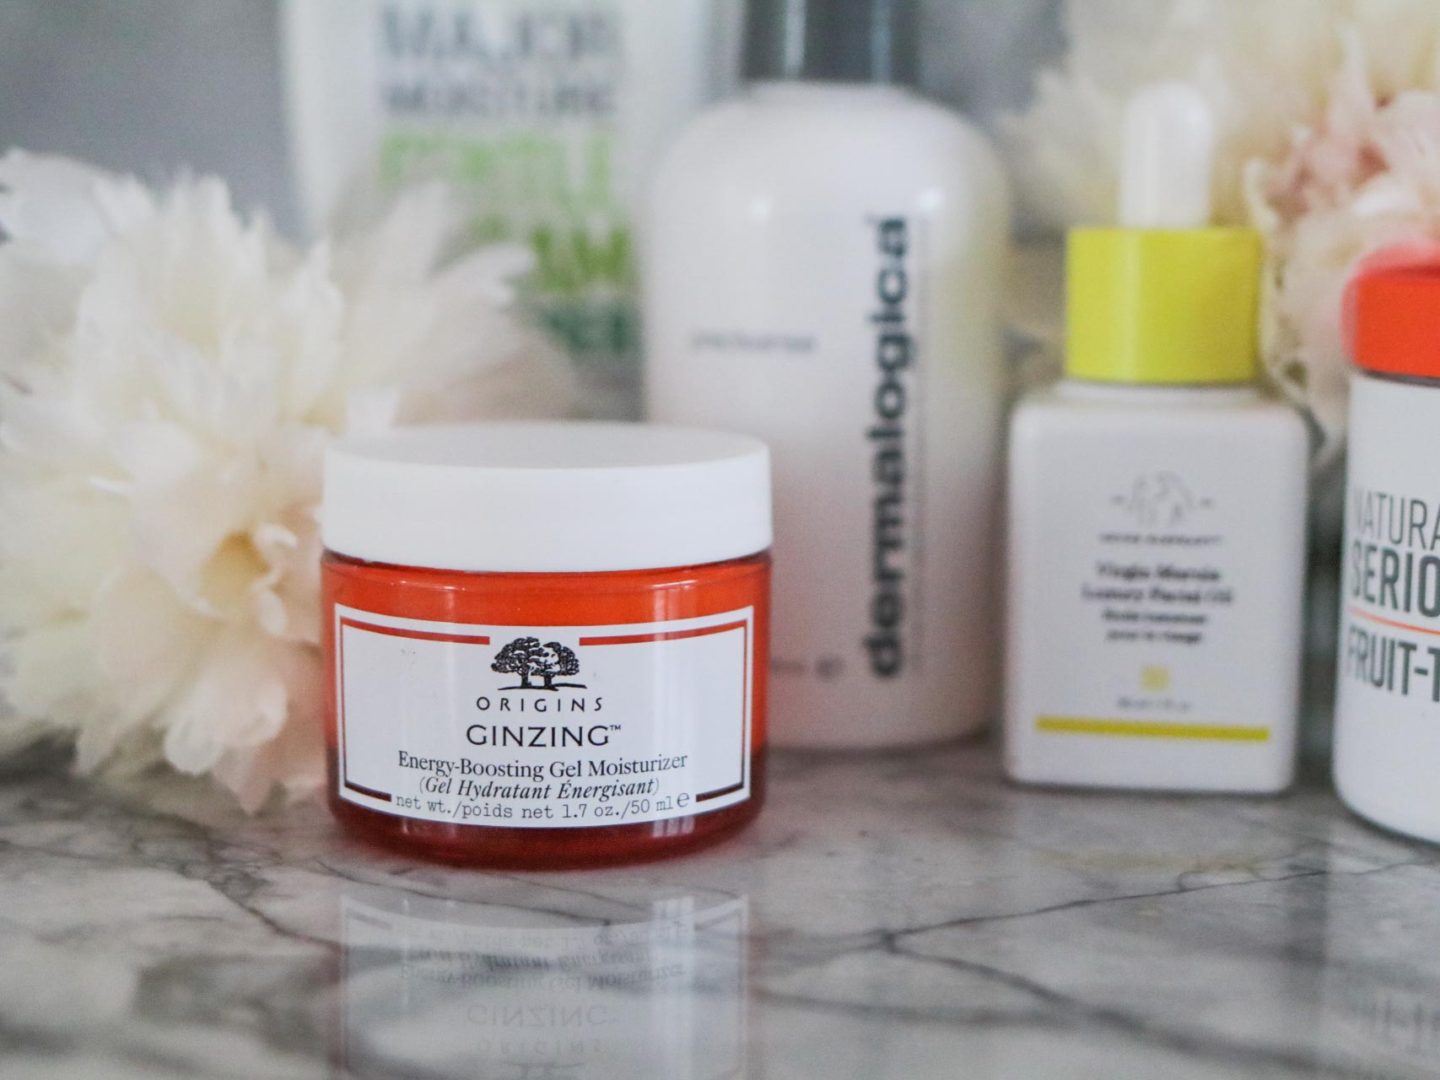 6 skincare revival product picks, featuring Origins Ginzing